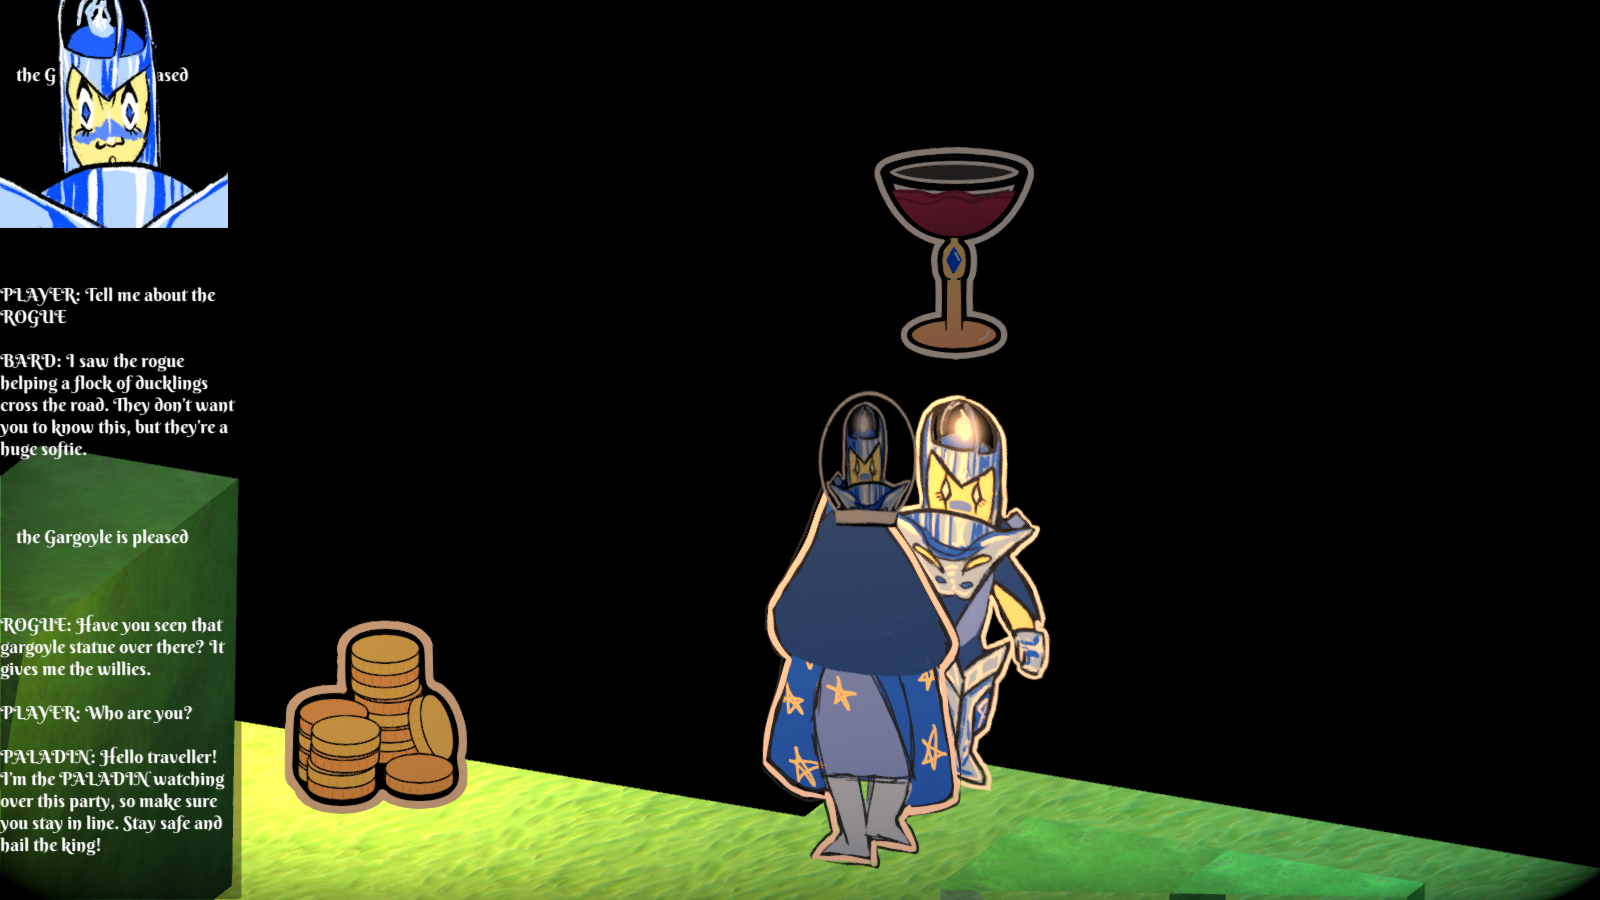 The Mage player gives a wine glass to the Paladin, and they blush. Copious amounts of text are logged on the left.